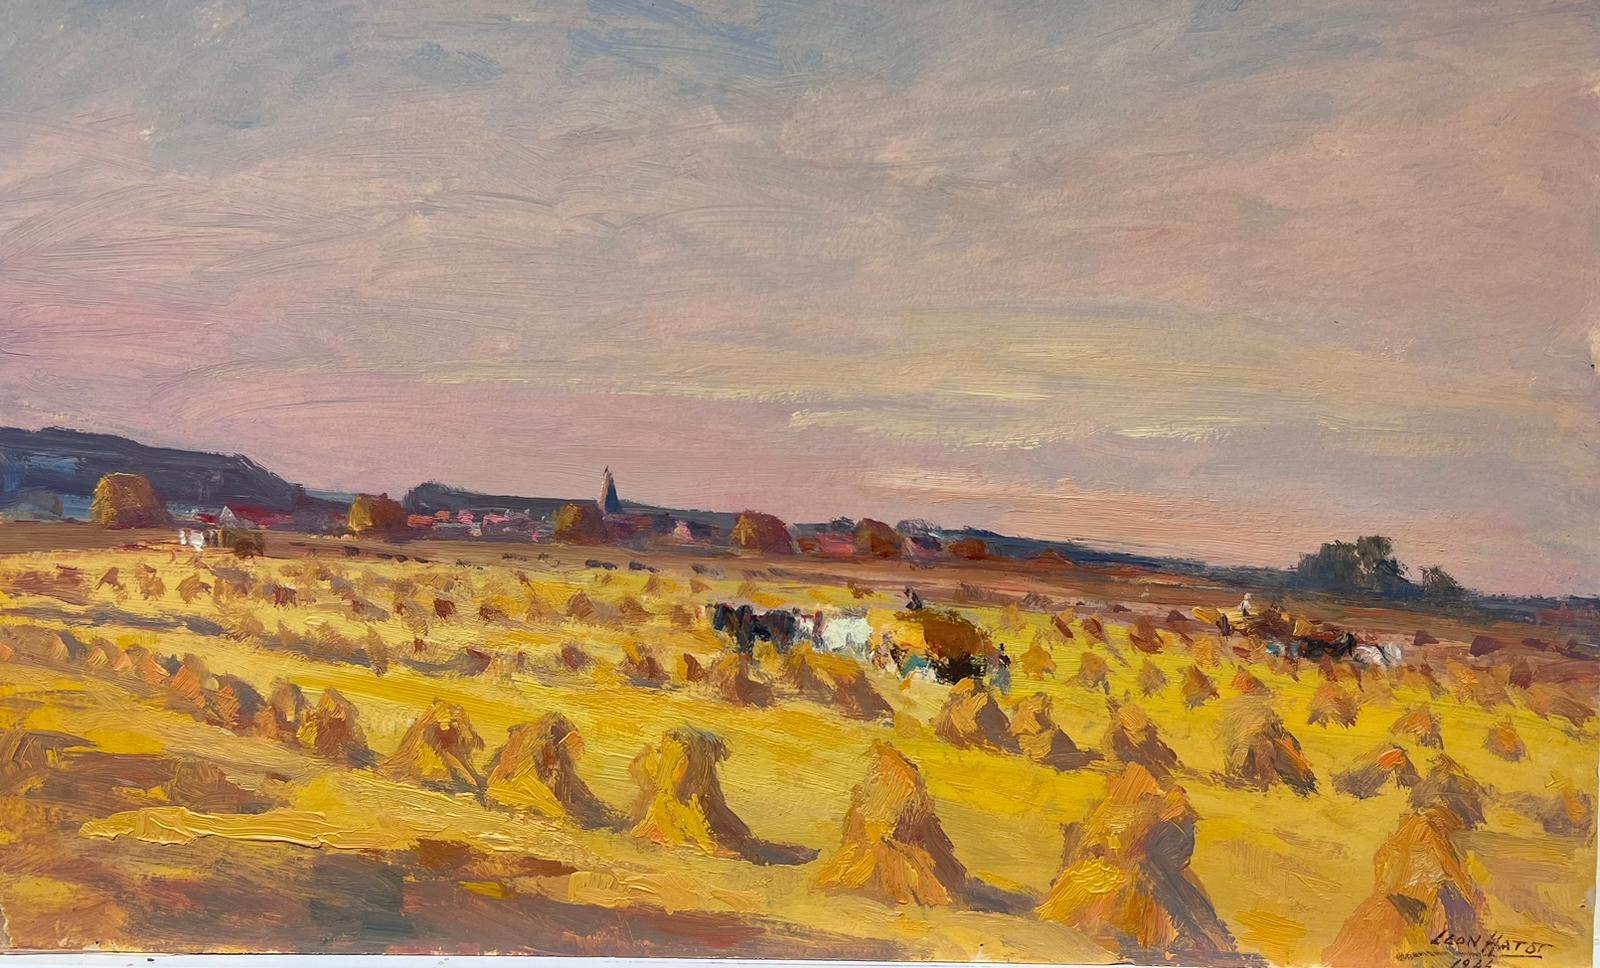 Leon Hatot Landscape Painting - Vintage French Oil Painting Of A Golden Field Of Hay Bales